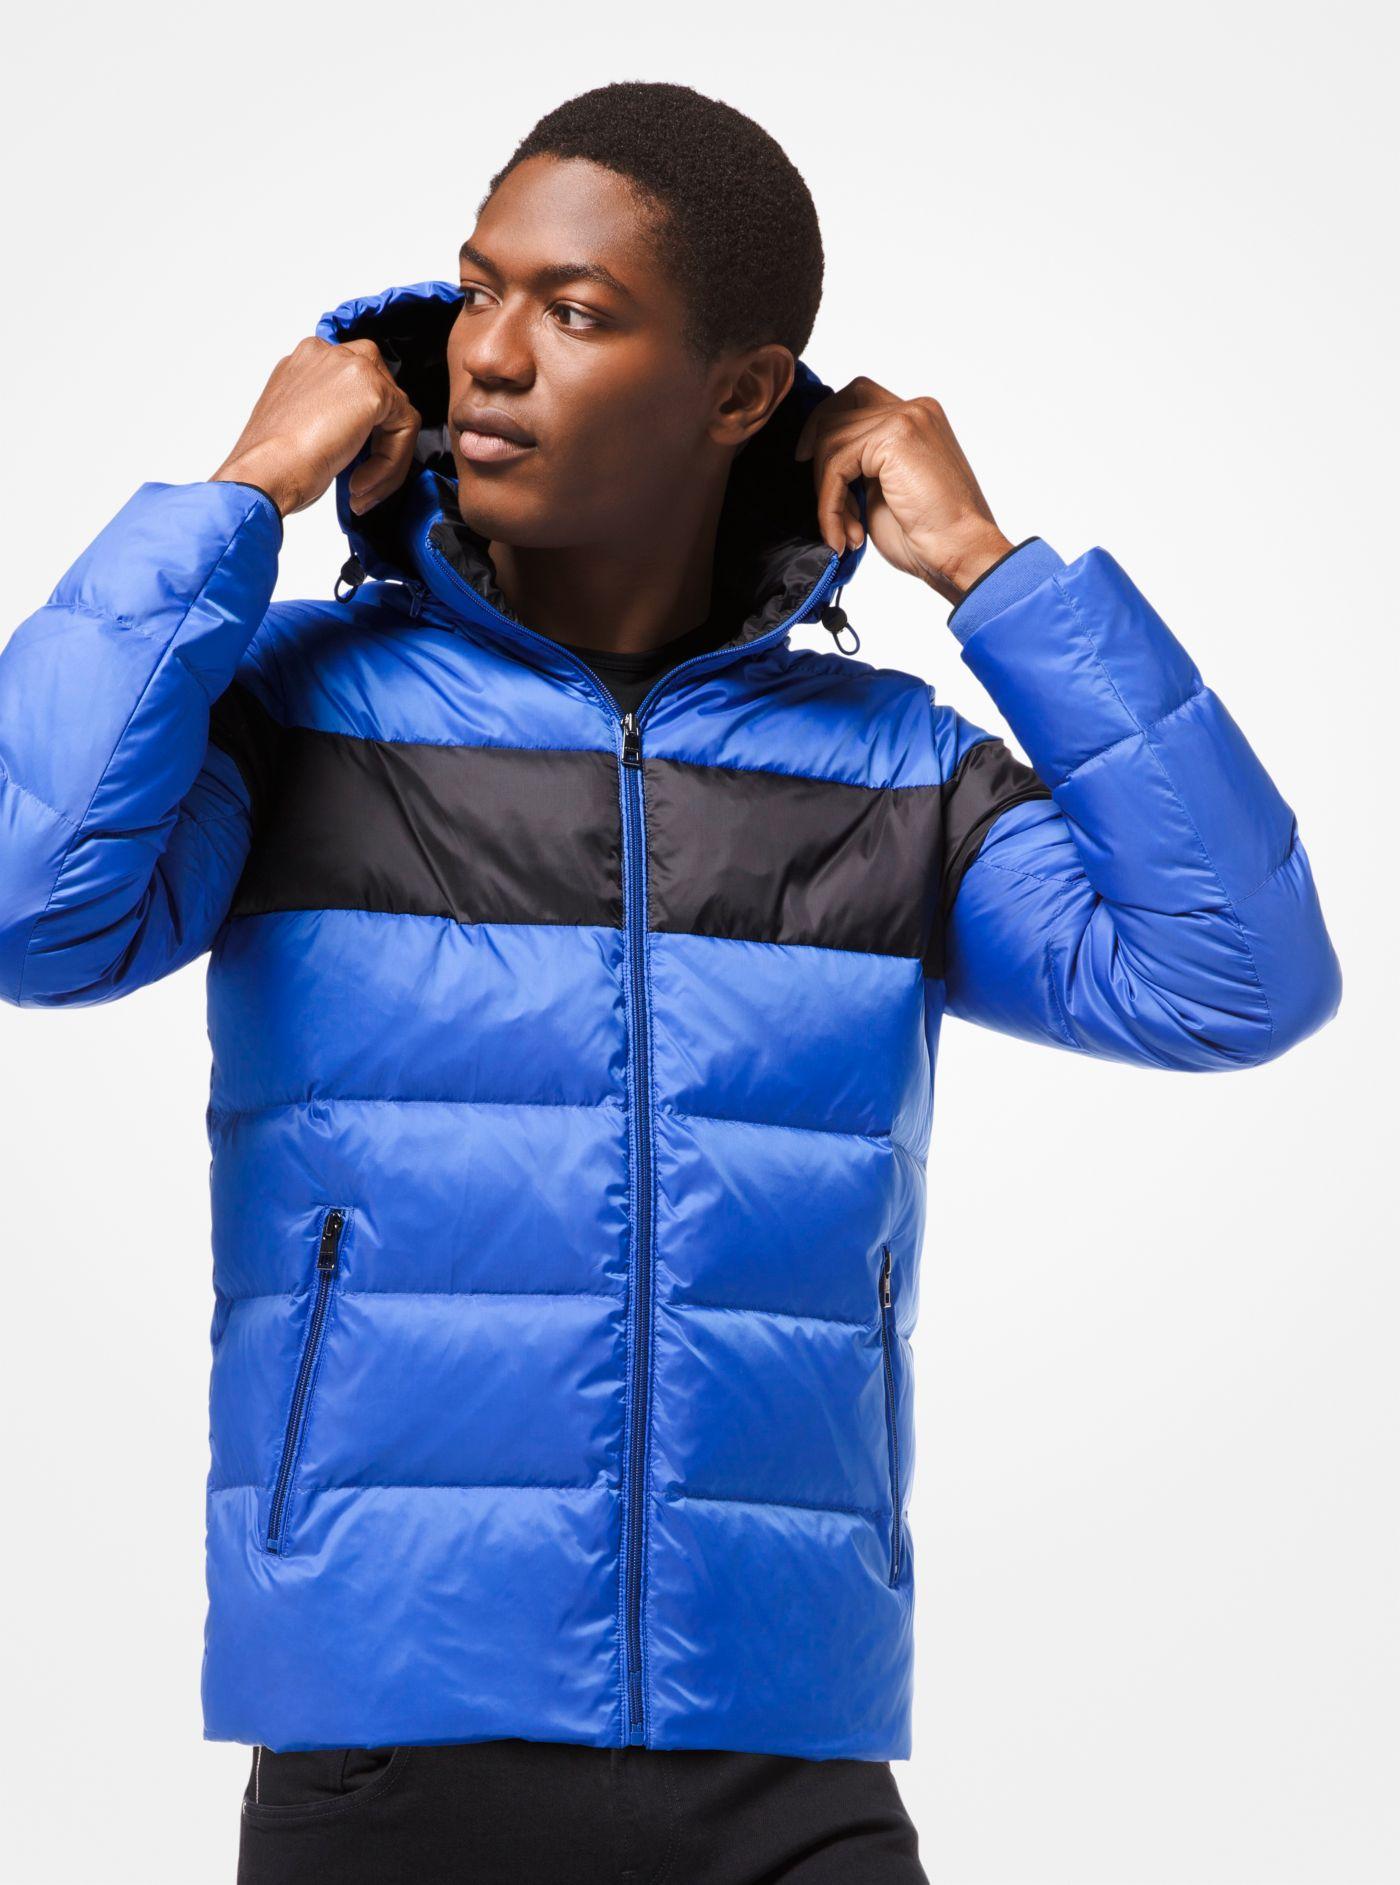 Michael Kors Synthetic Color-block Nylon Puffer Jacket in Sapphire (Blue)  for Men - Lyst